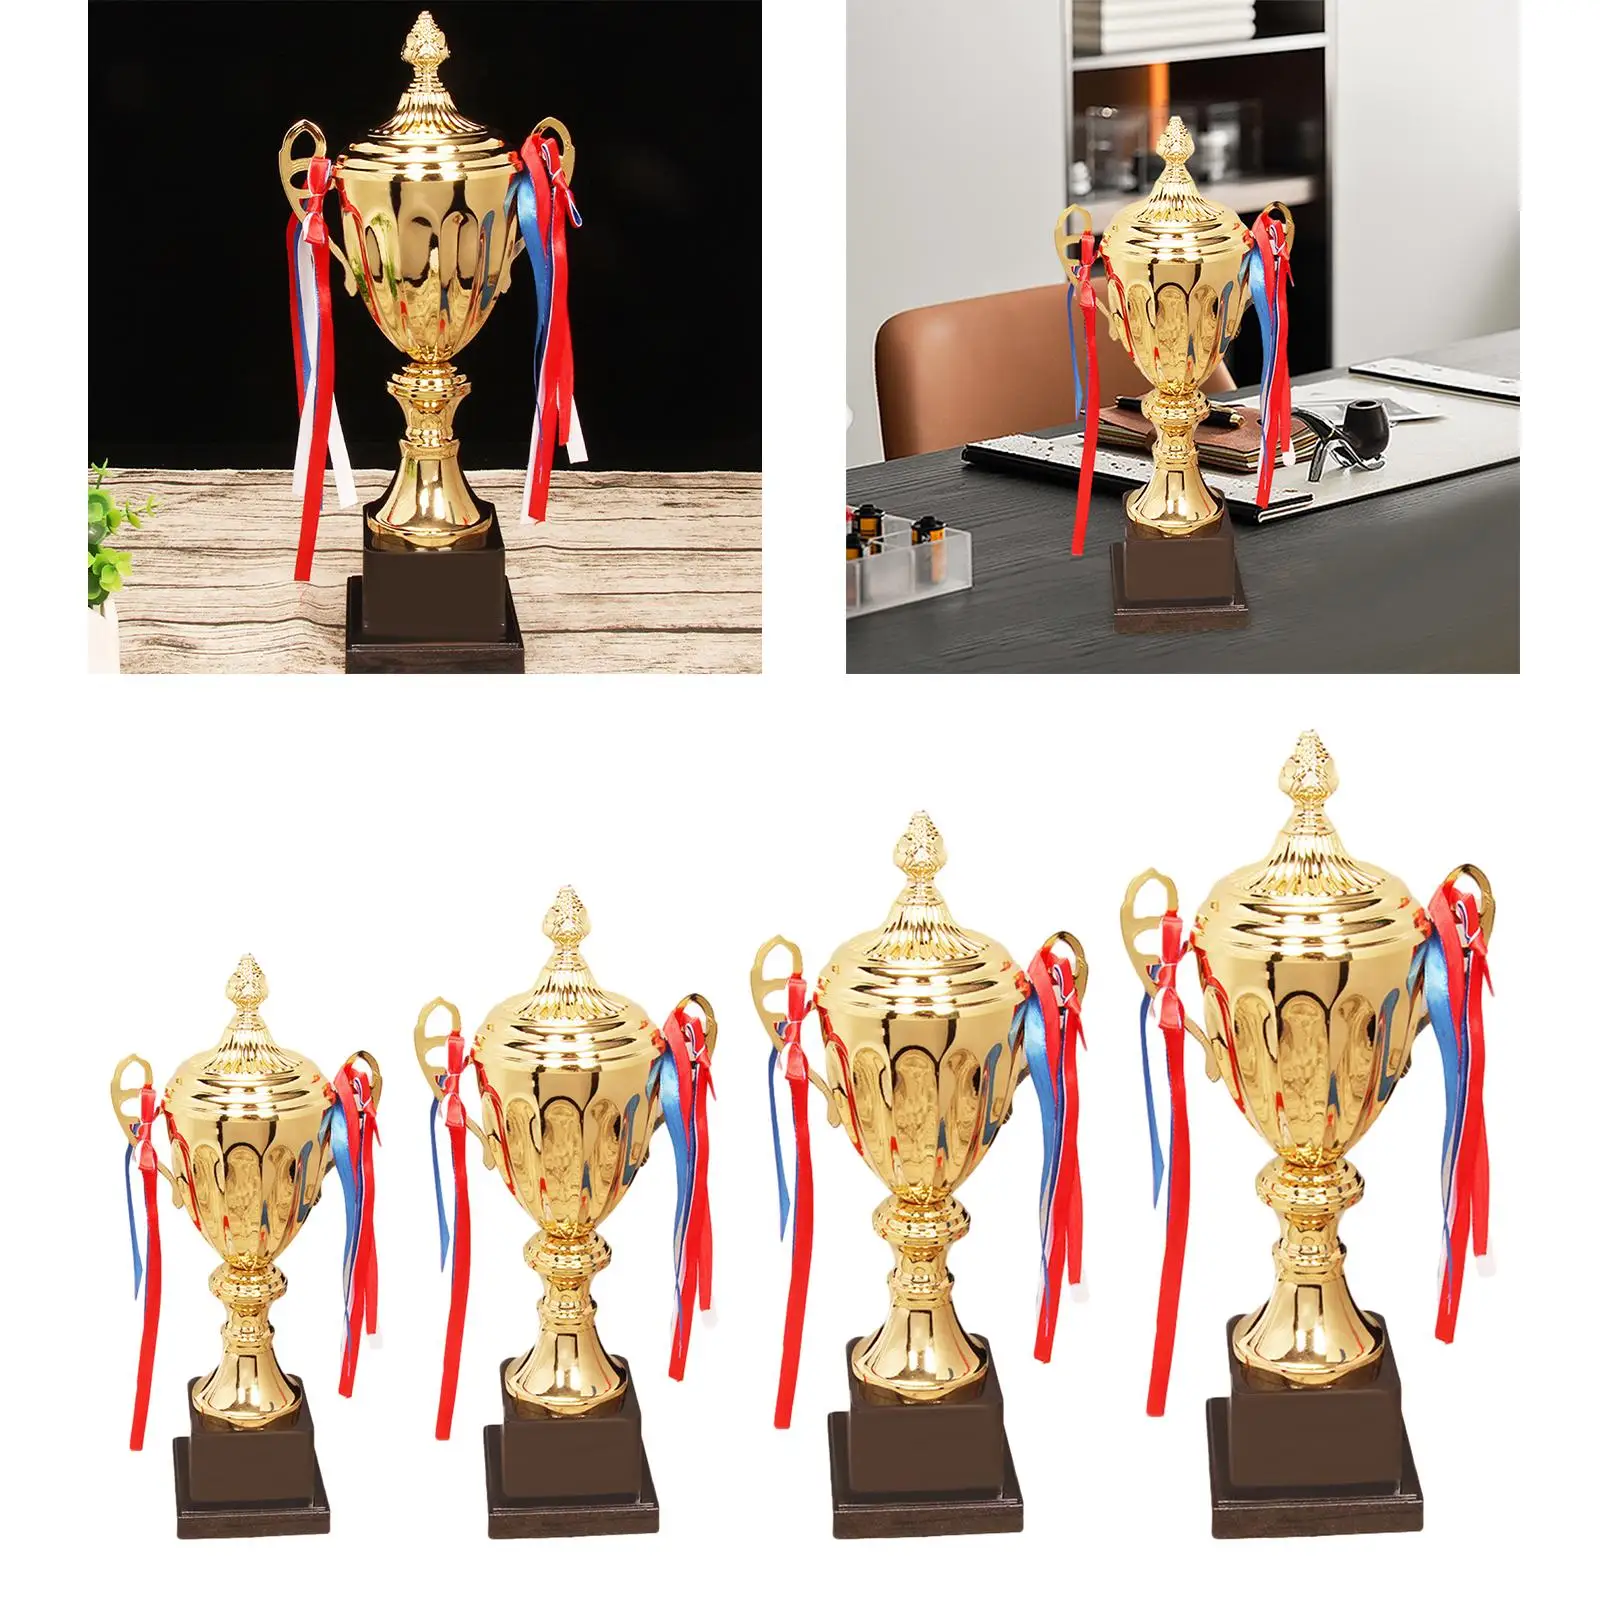 Award Trophy Children Props Competitions Winning Reward Winning Trophy Trophy Cup for Football Tournaments Sports Decor